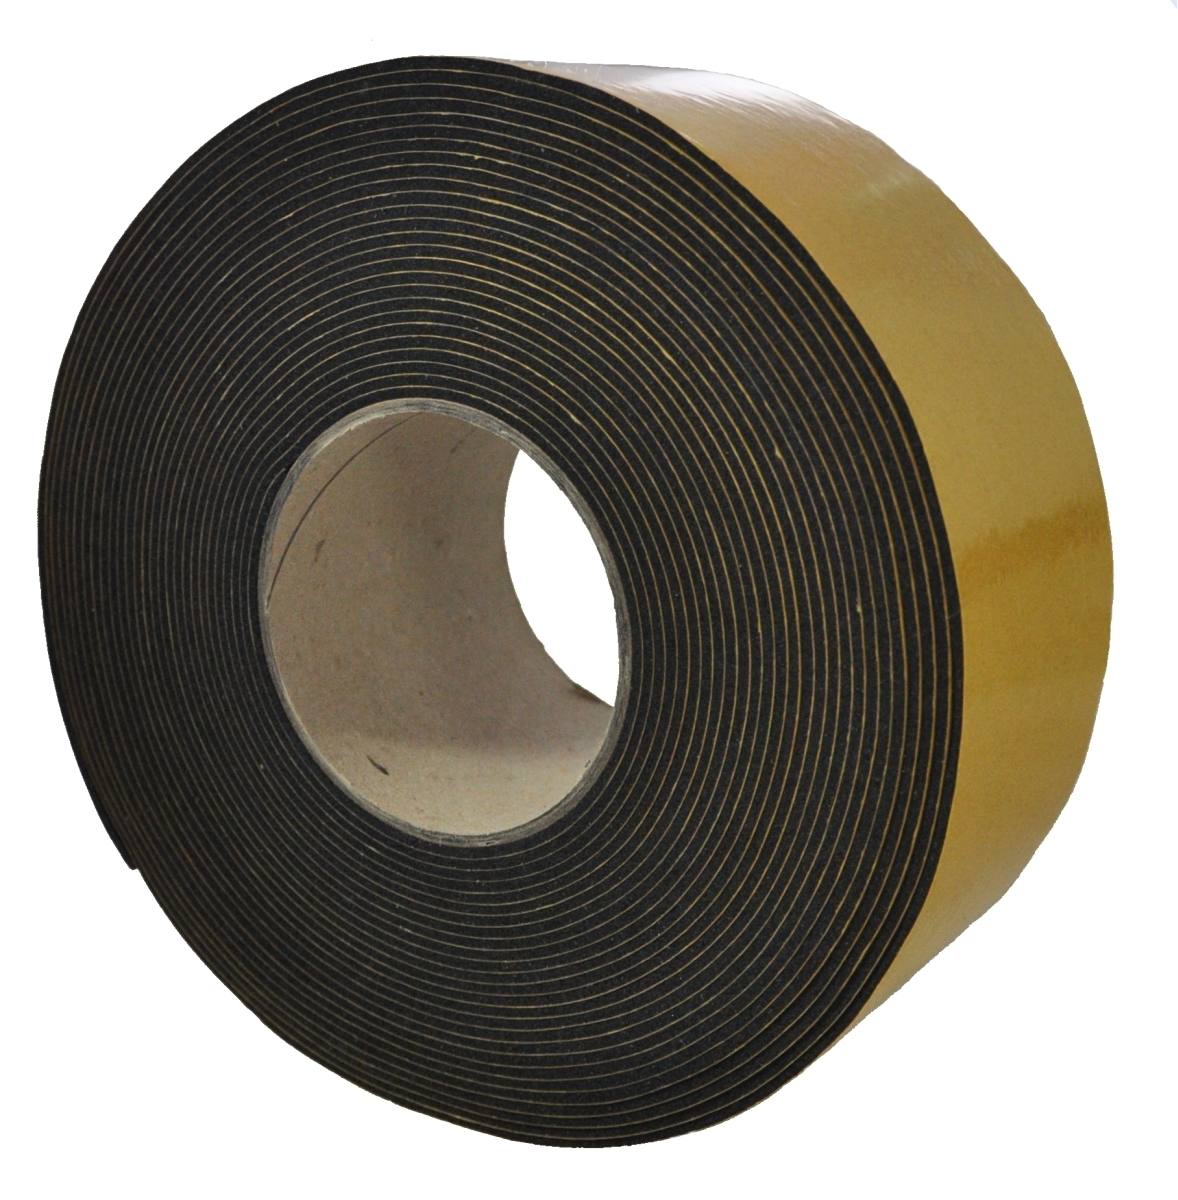 S-K-S EPDM 6mmx38mmx10m black self-adhesive on one side